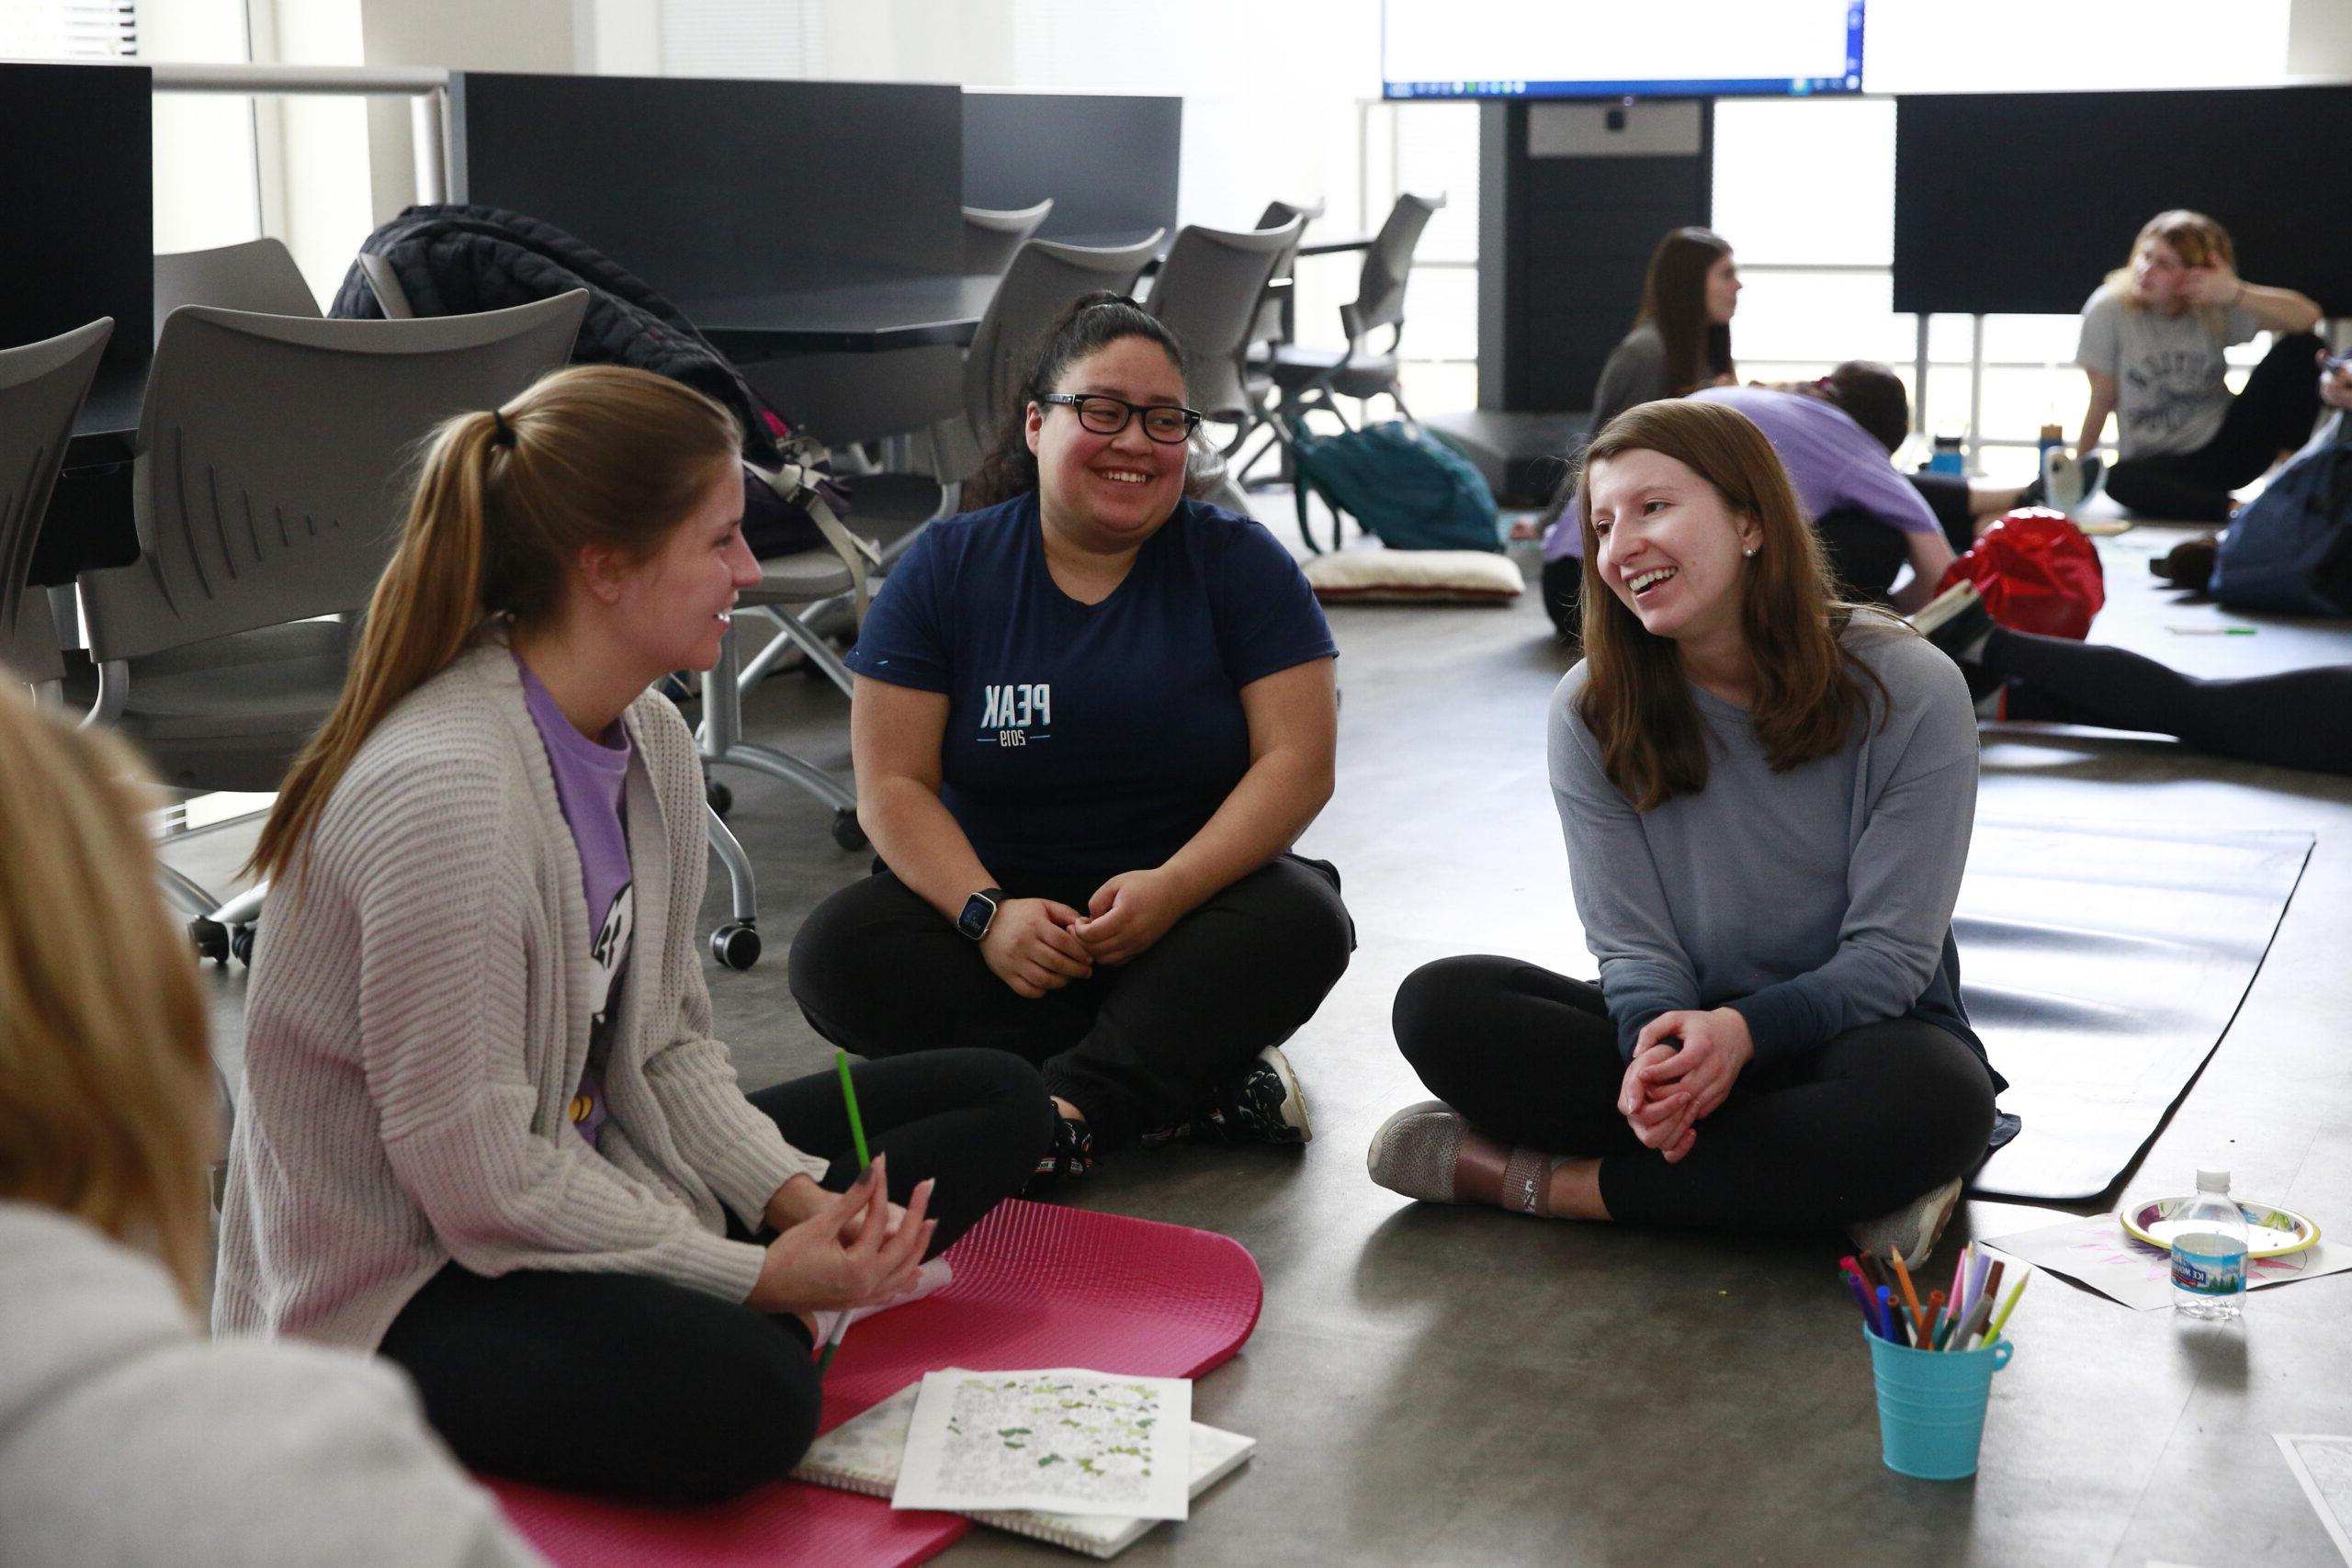 Three female student sit in a circle on the floor and are working on a project.